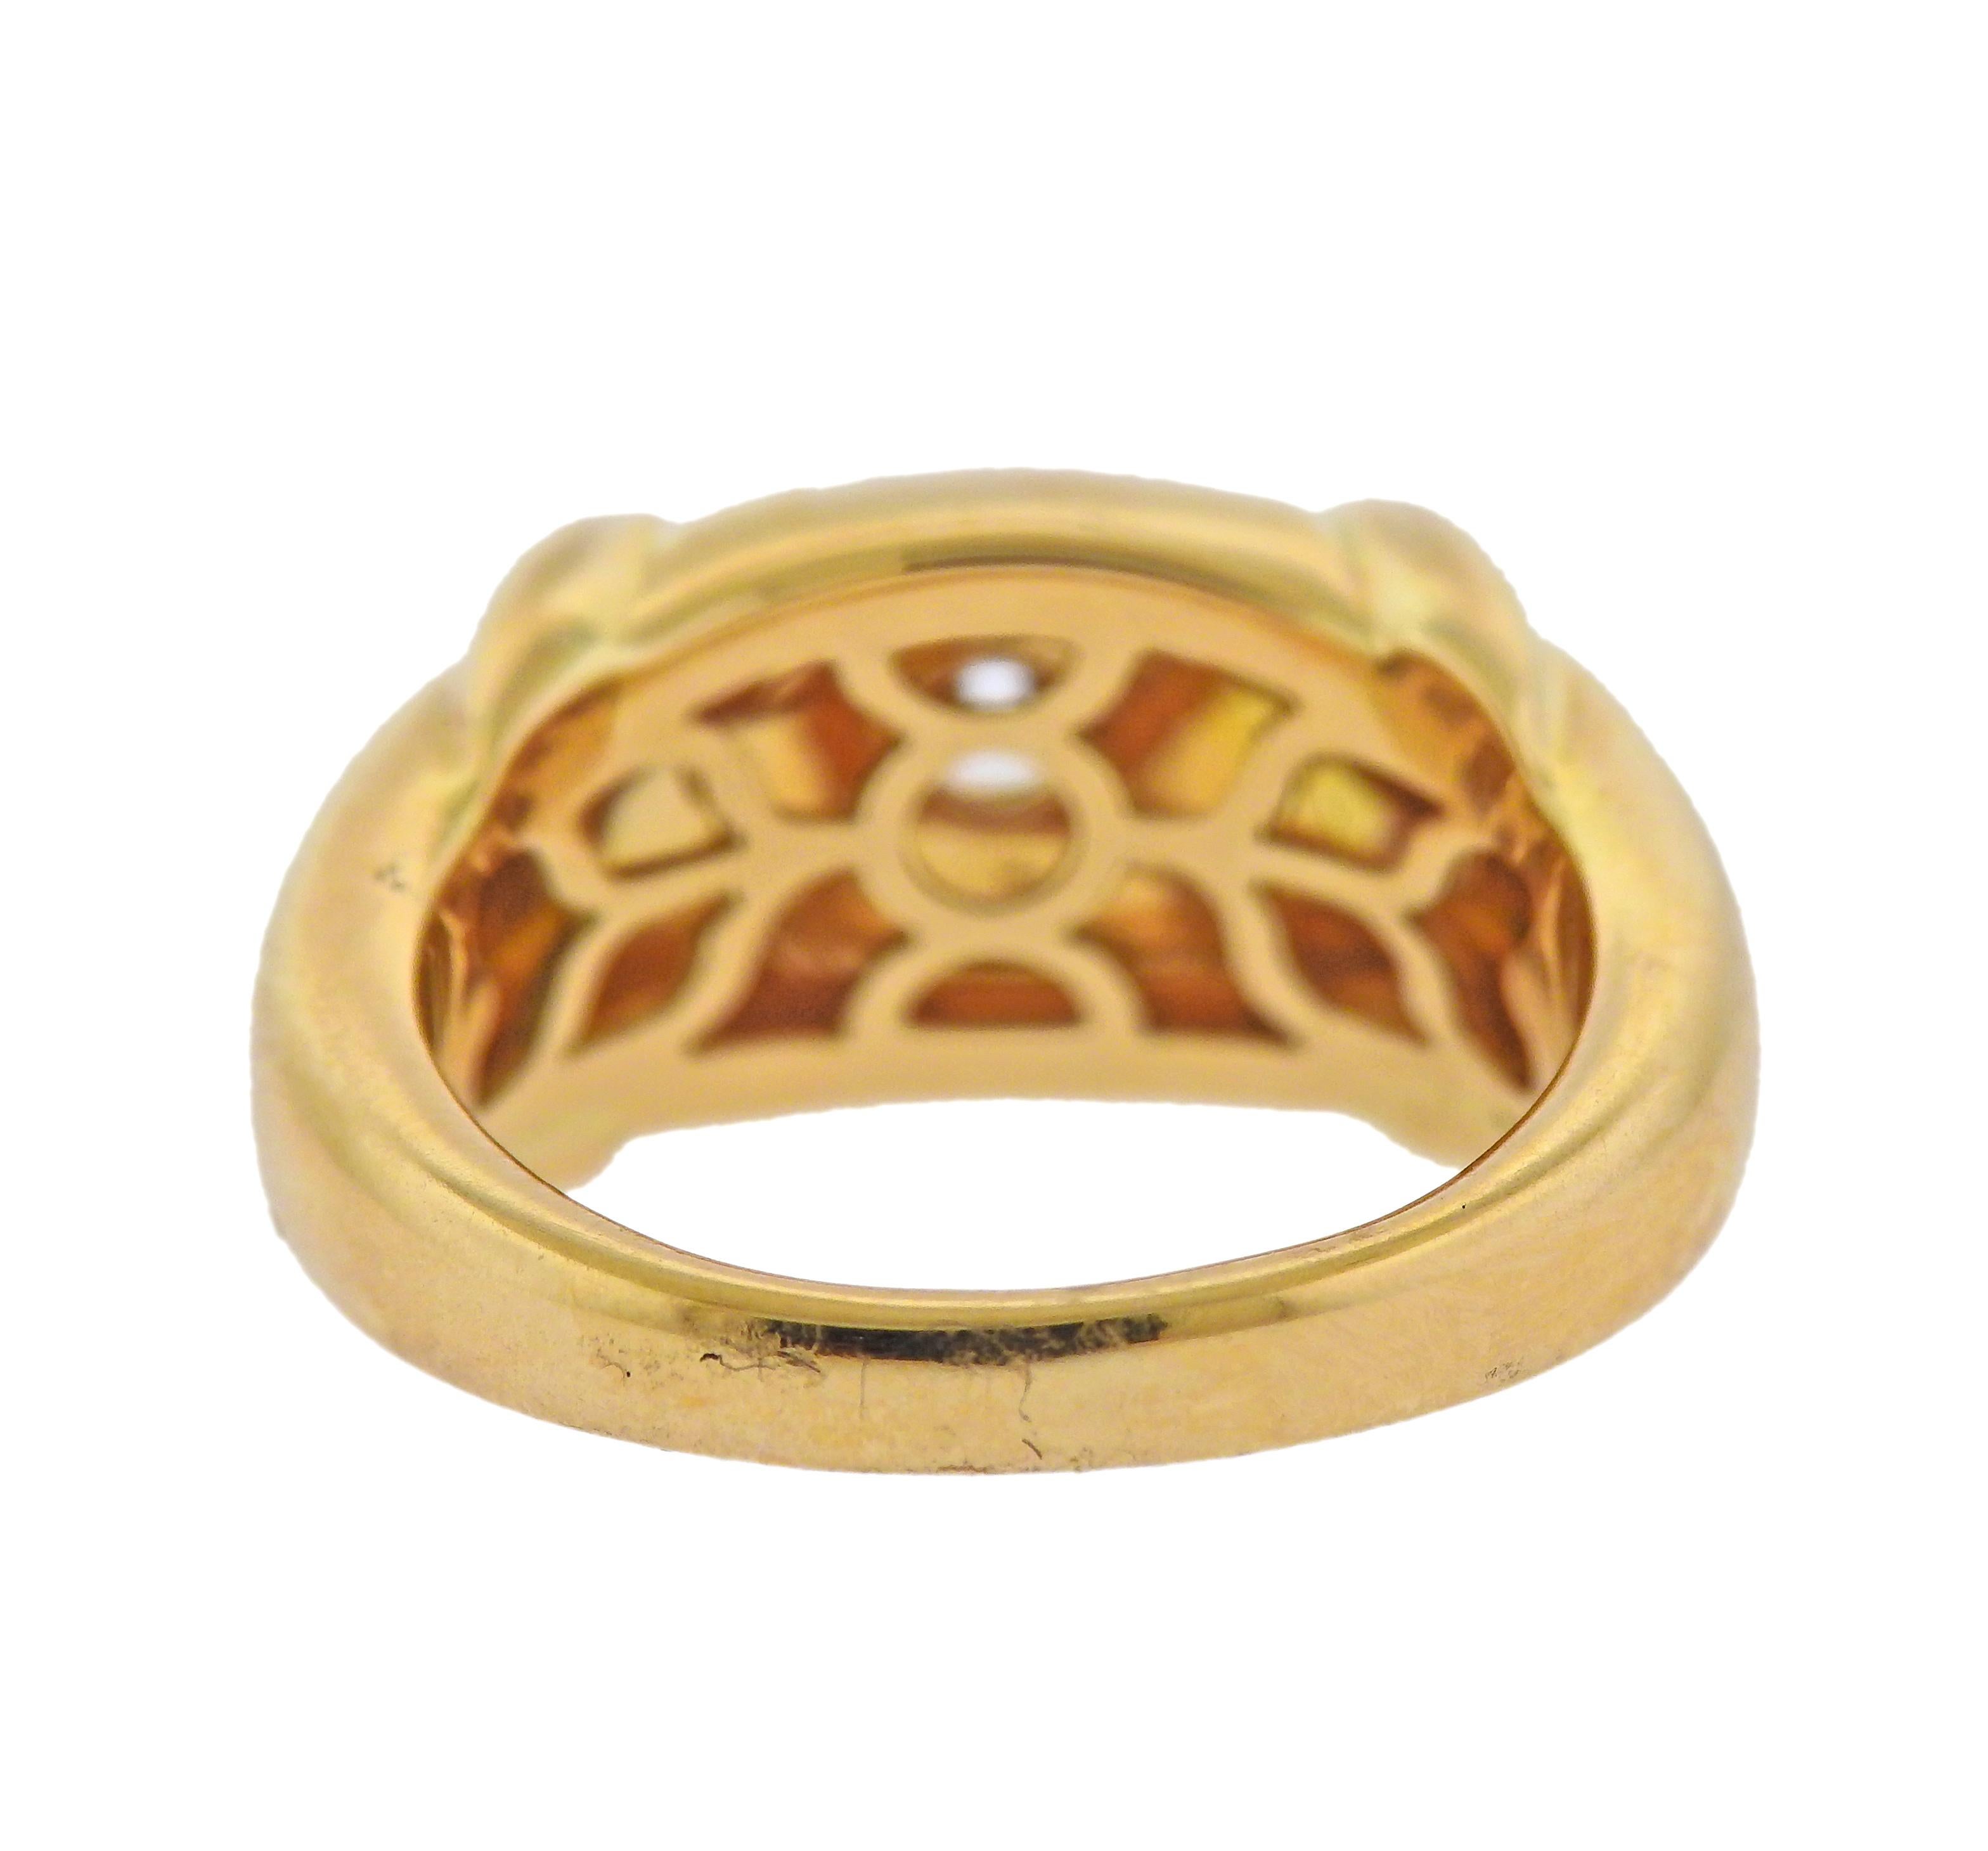 Bulgari Gold Ring In Excellent Condition For Sale In New York, NY